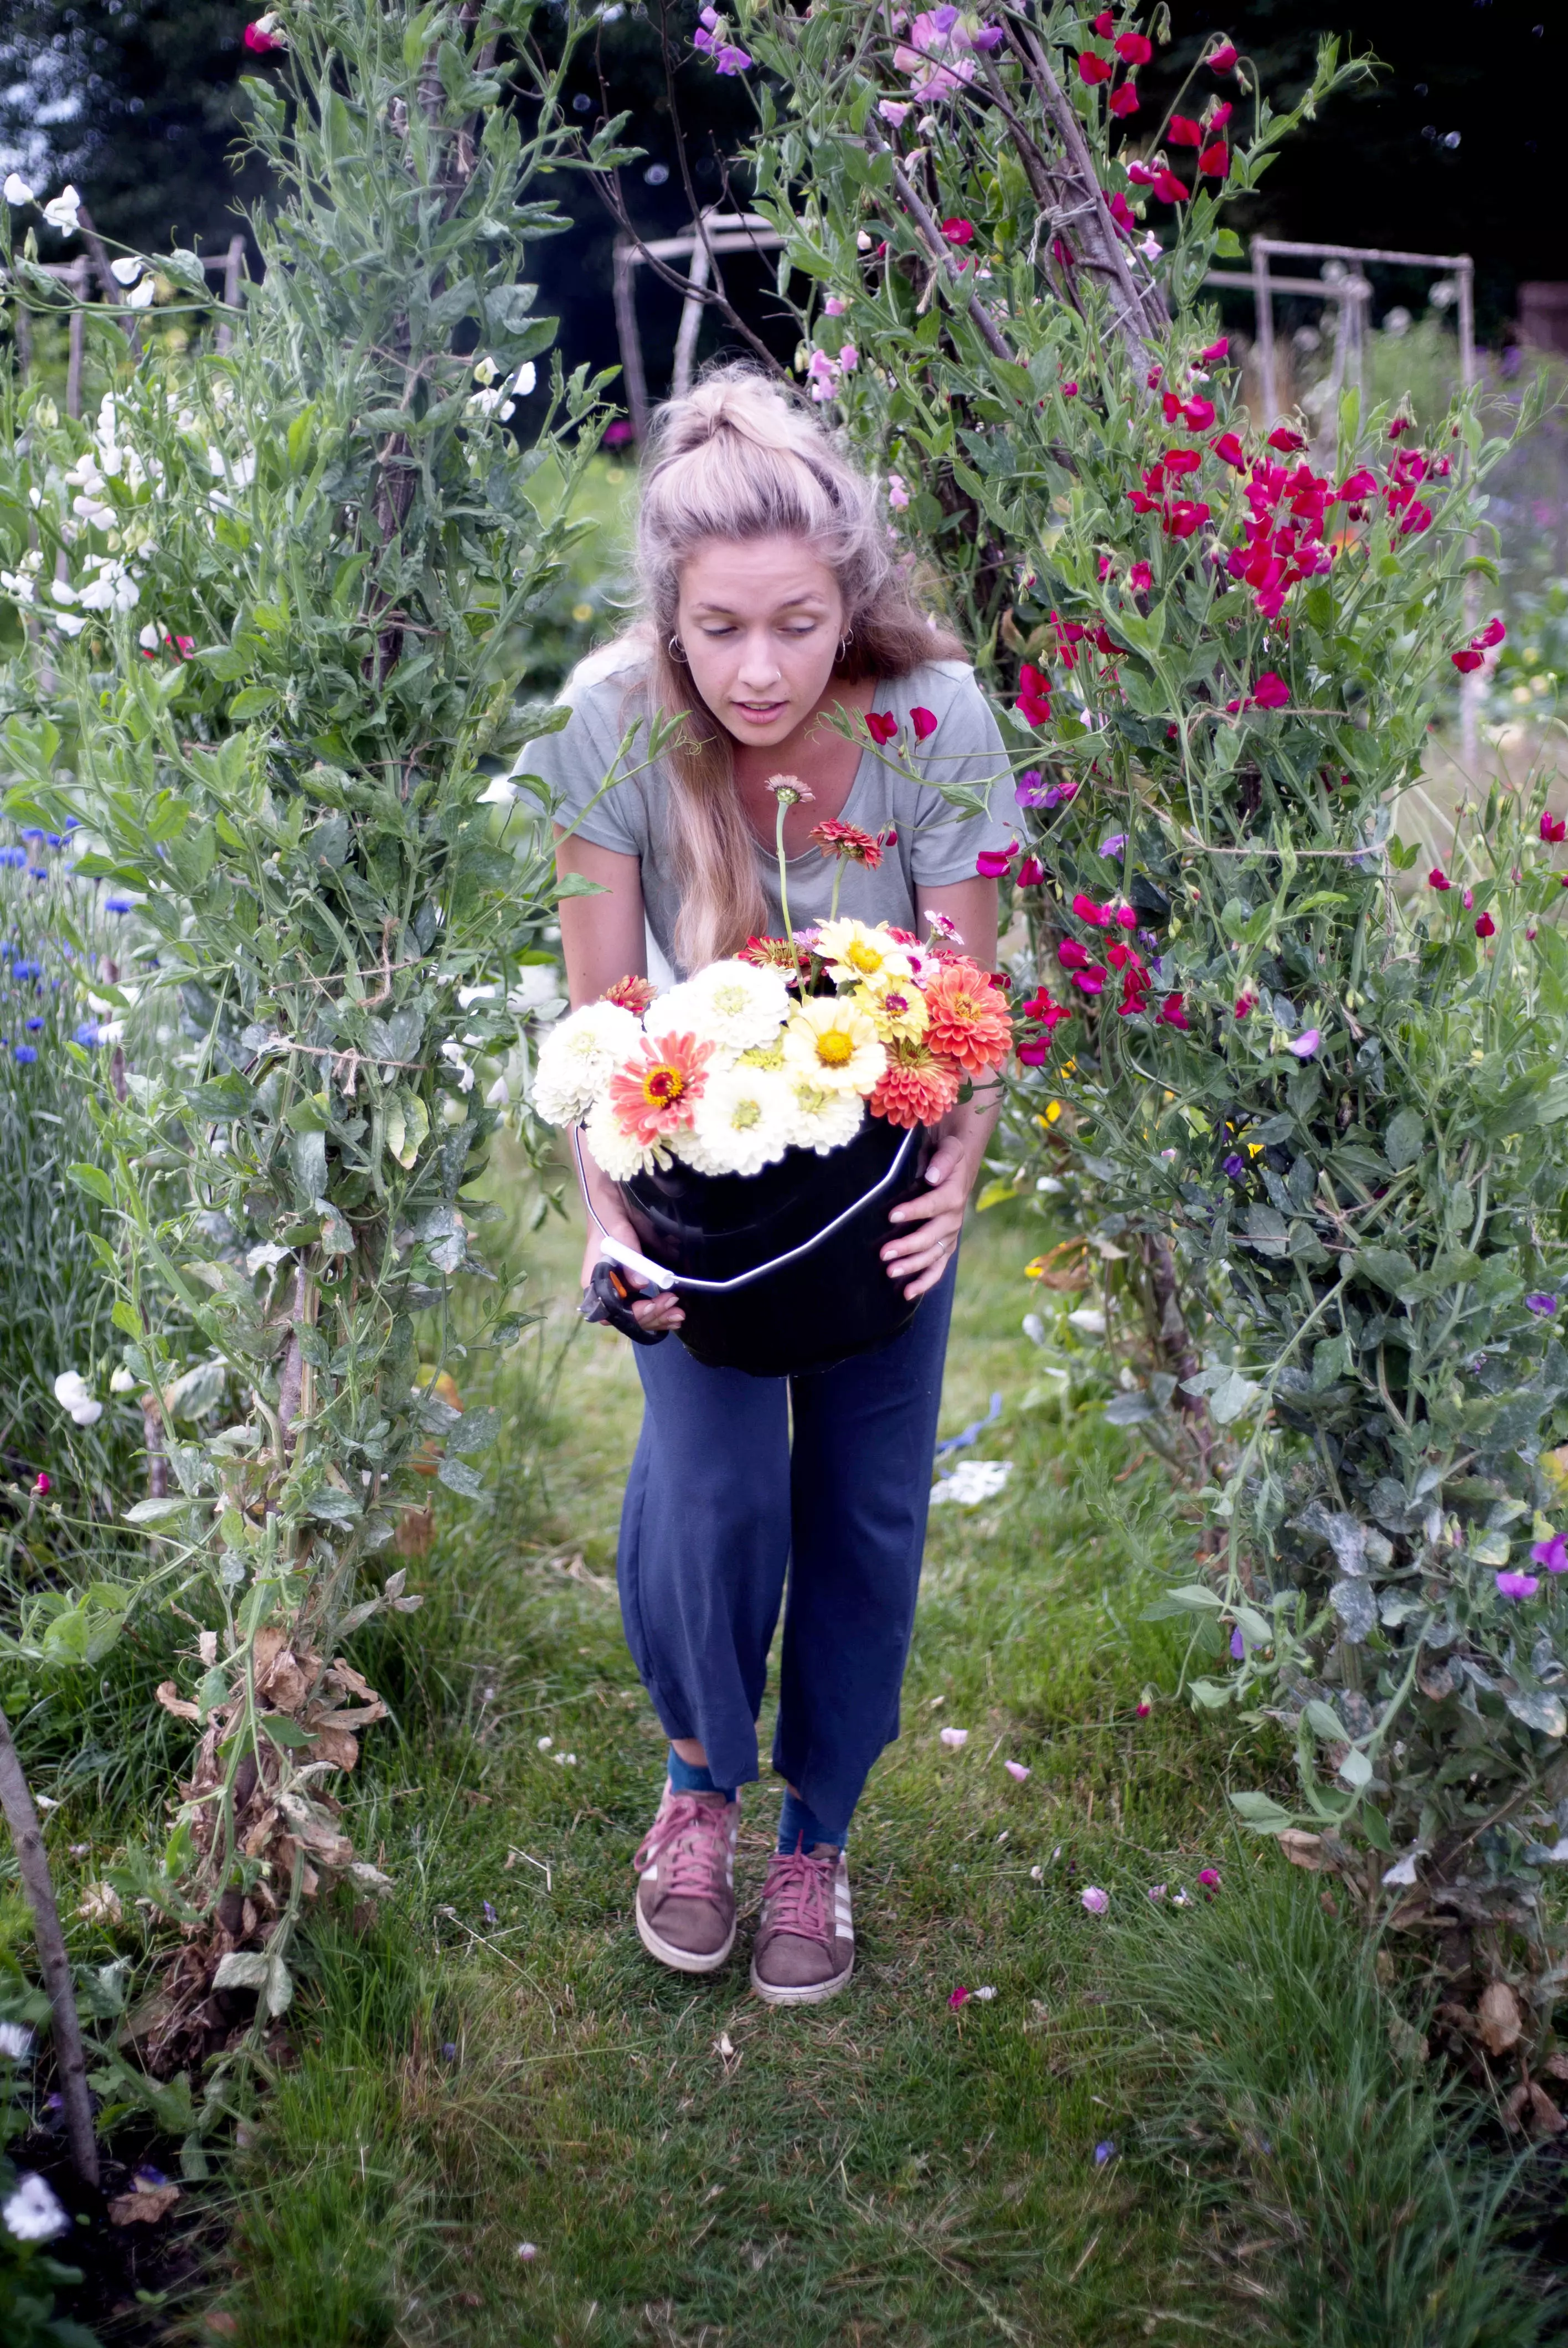 The green-fingered couple spent hours in the allotment making their wedding flowers